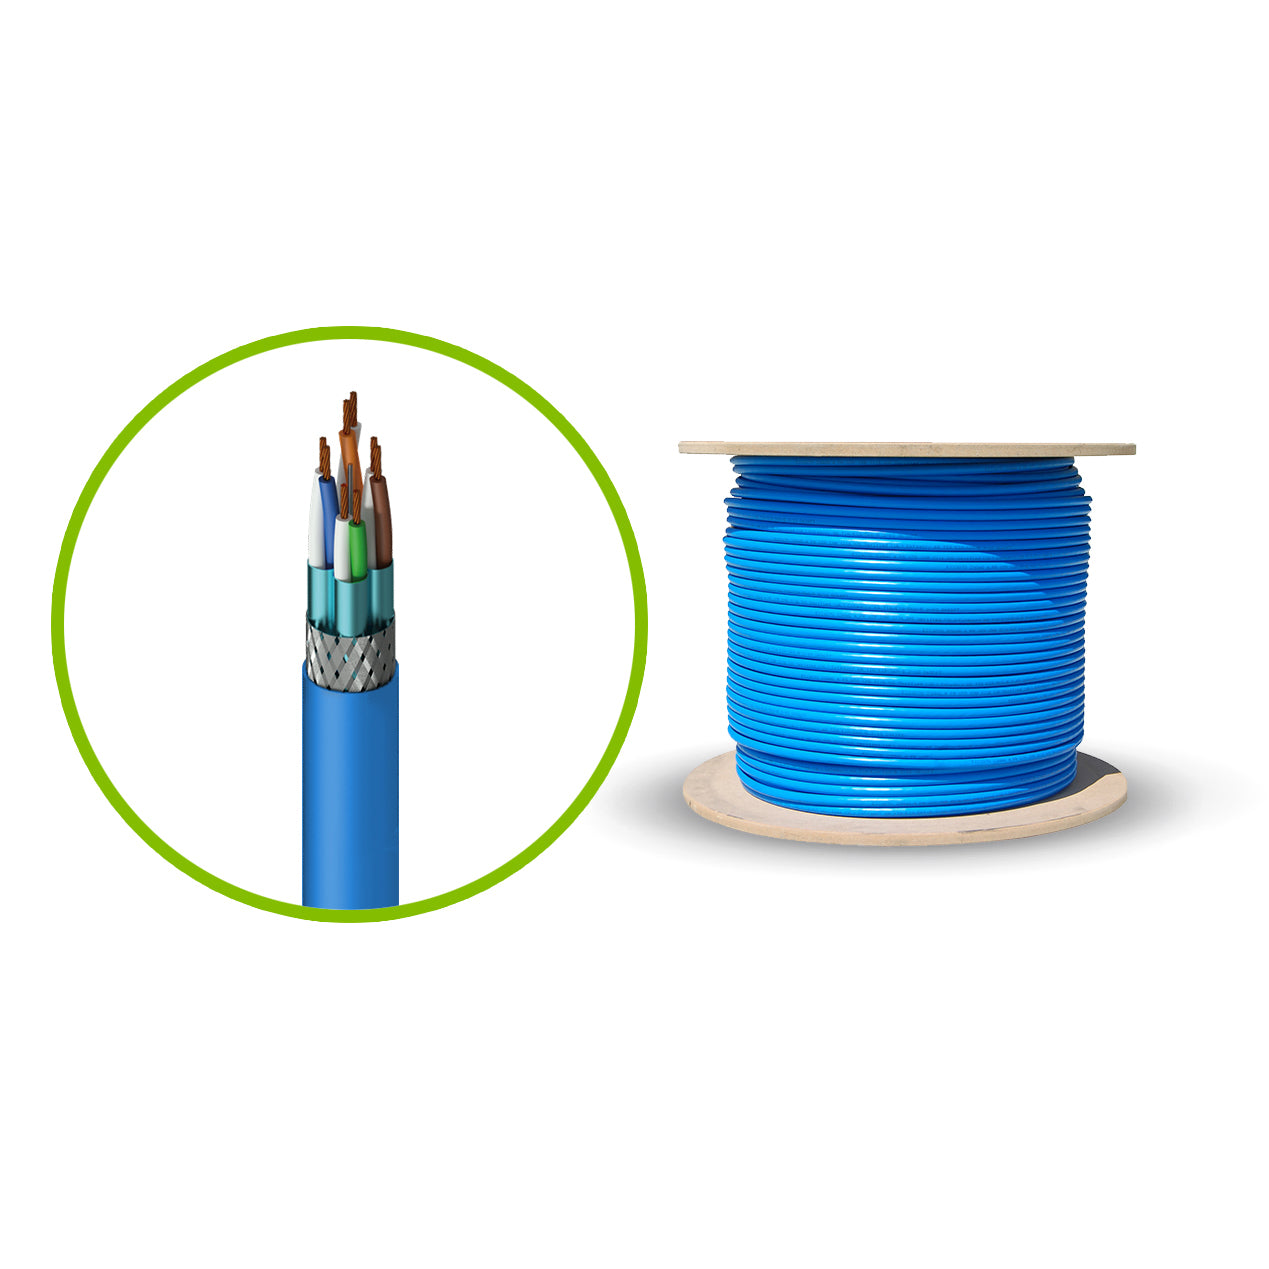 CAT 6A CABLE ROLLS